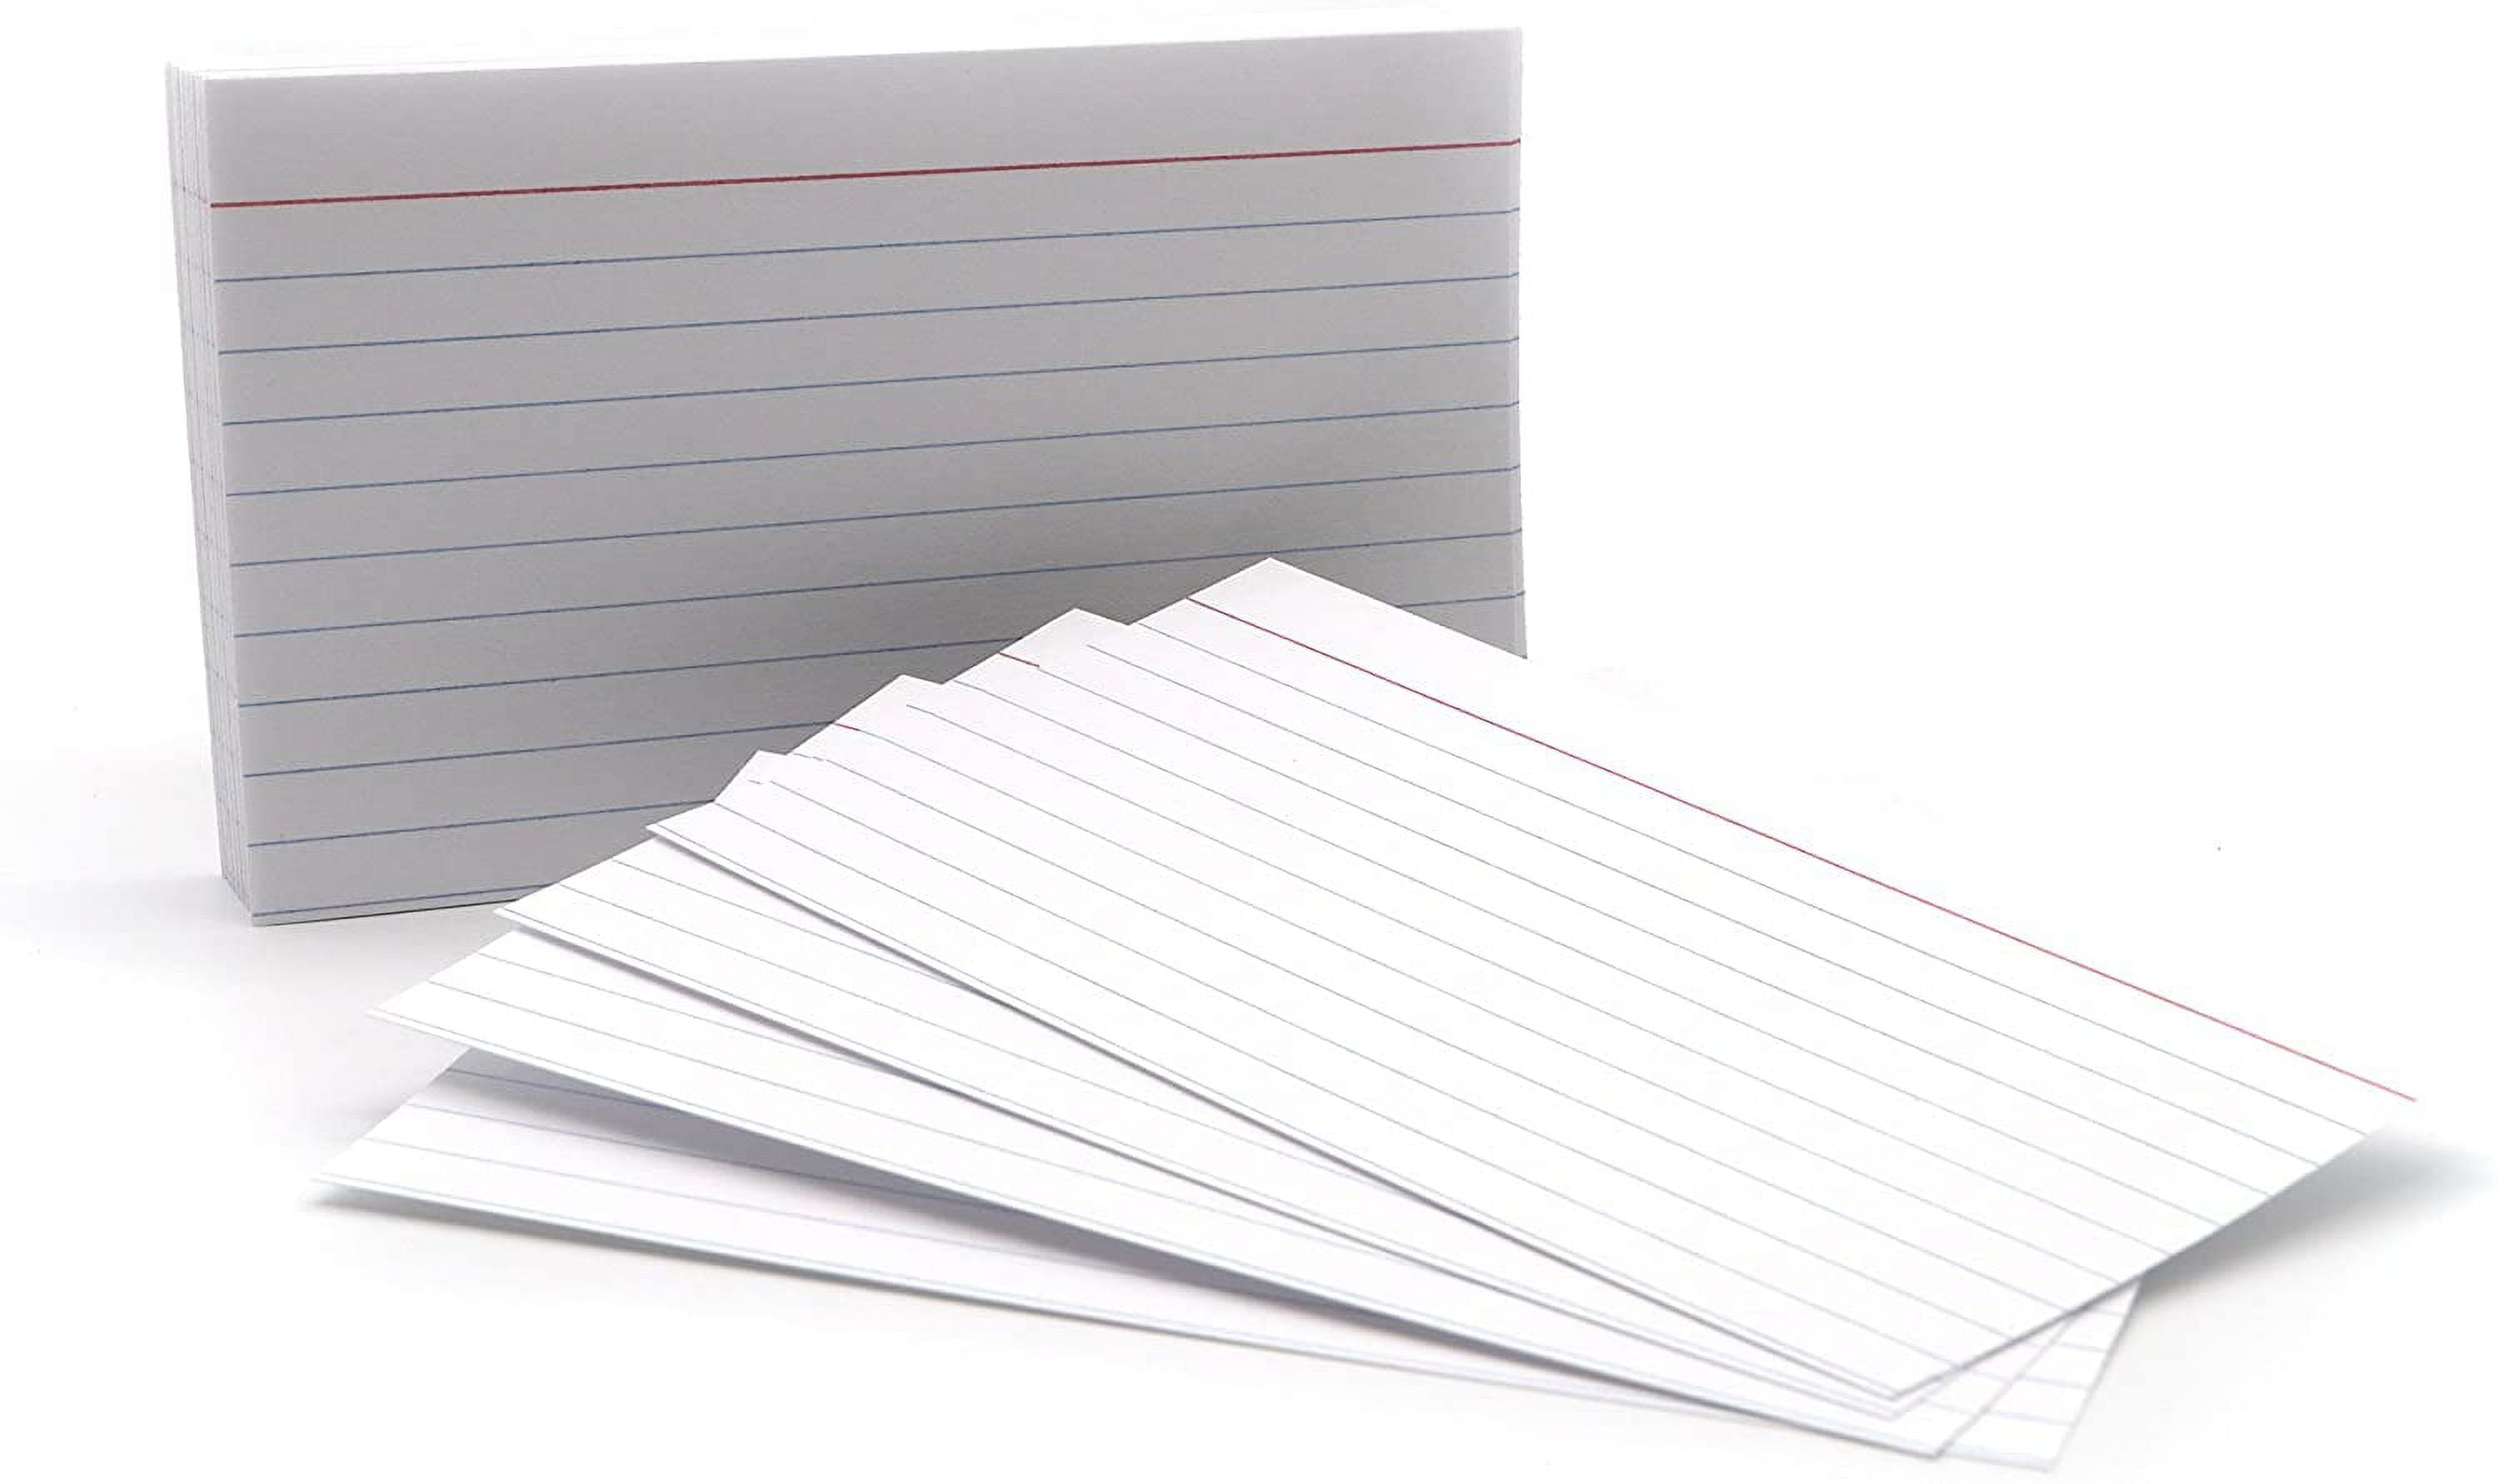  Home Advantage Ruled White Index Cards, File Lined Note Cards  (5-x-8-inch) : Office Products